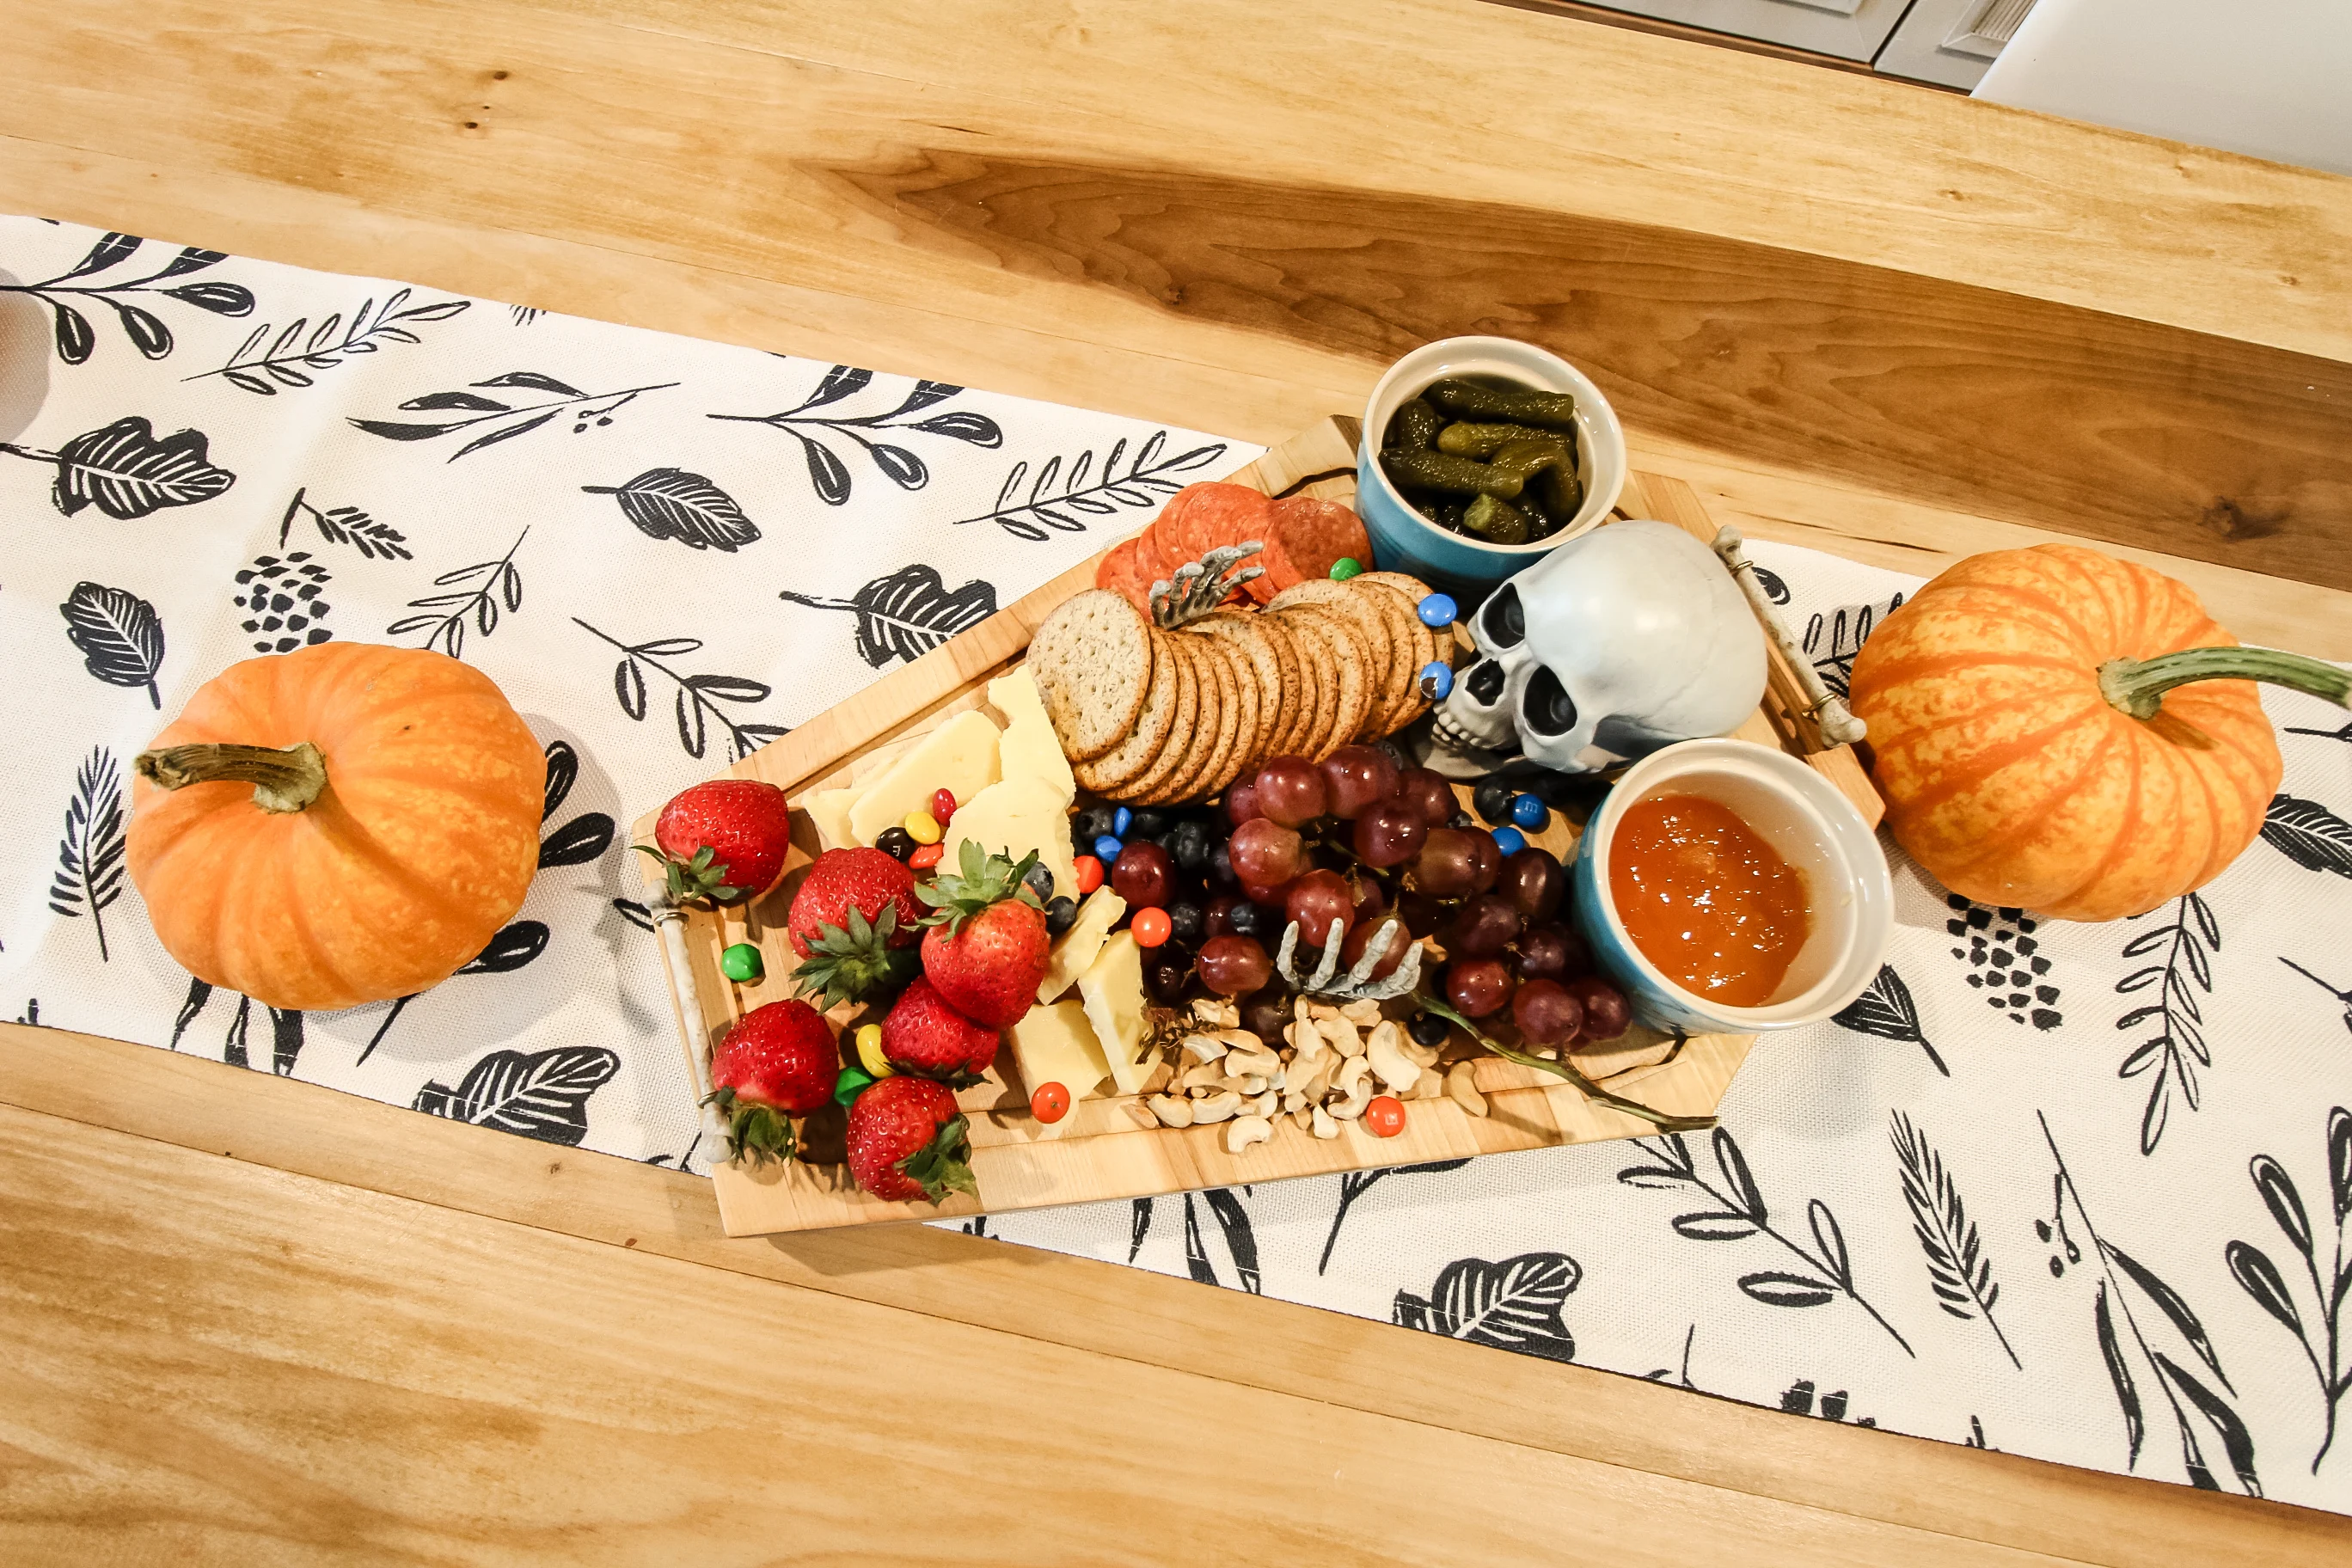 Skeleton cheeseboard with charcuterie